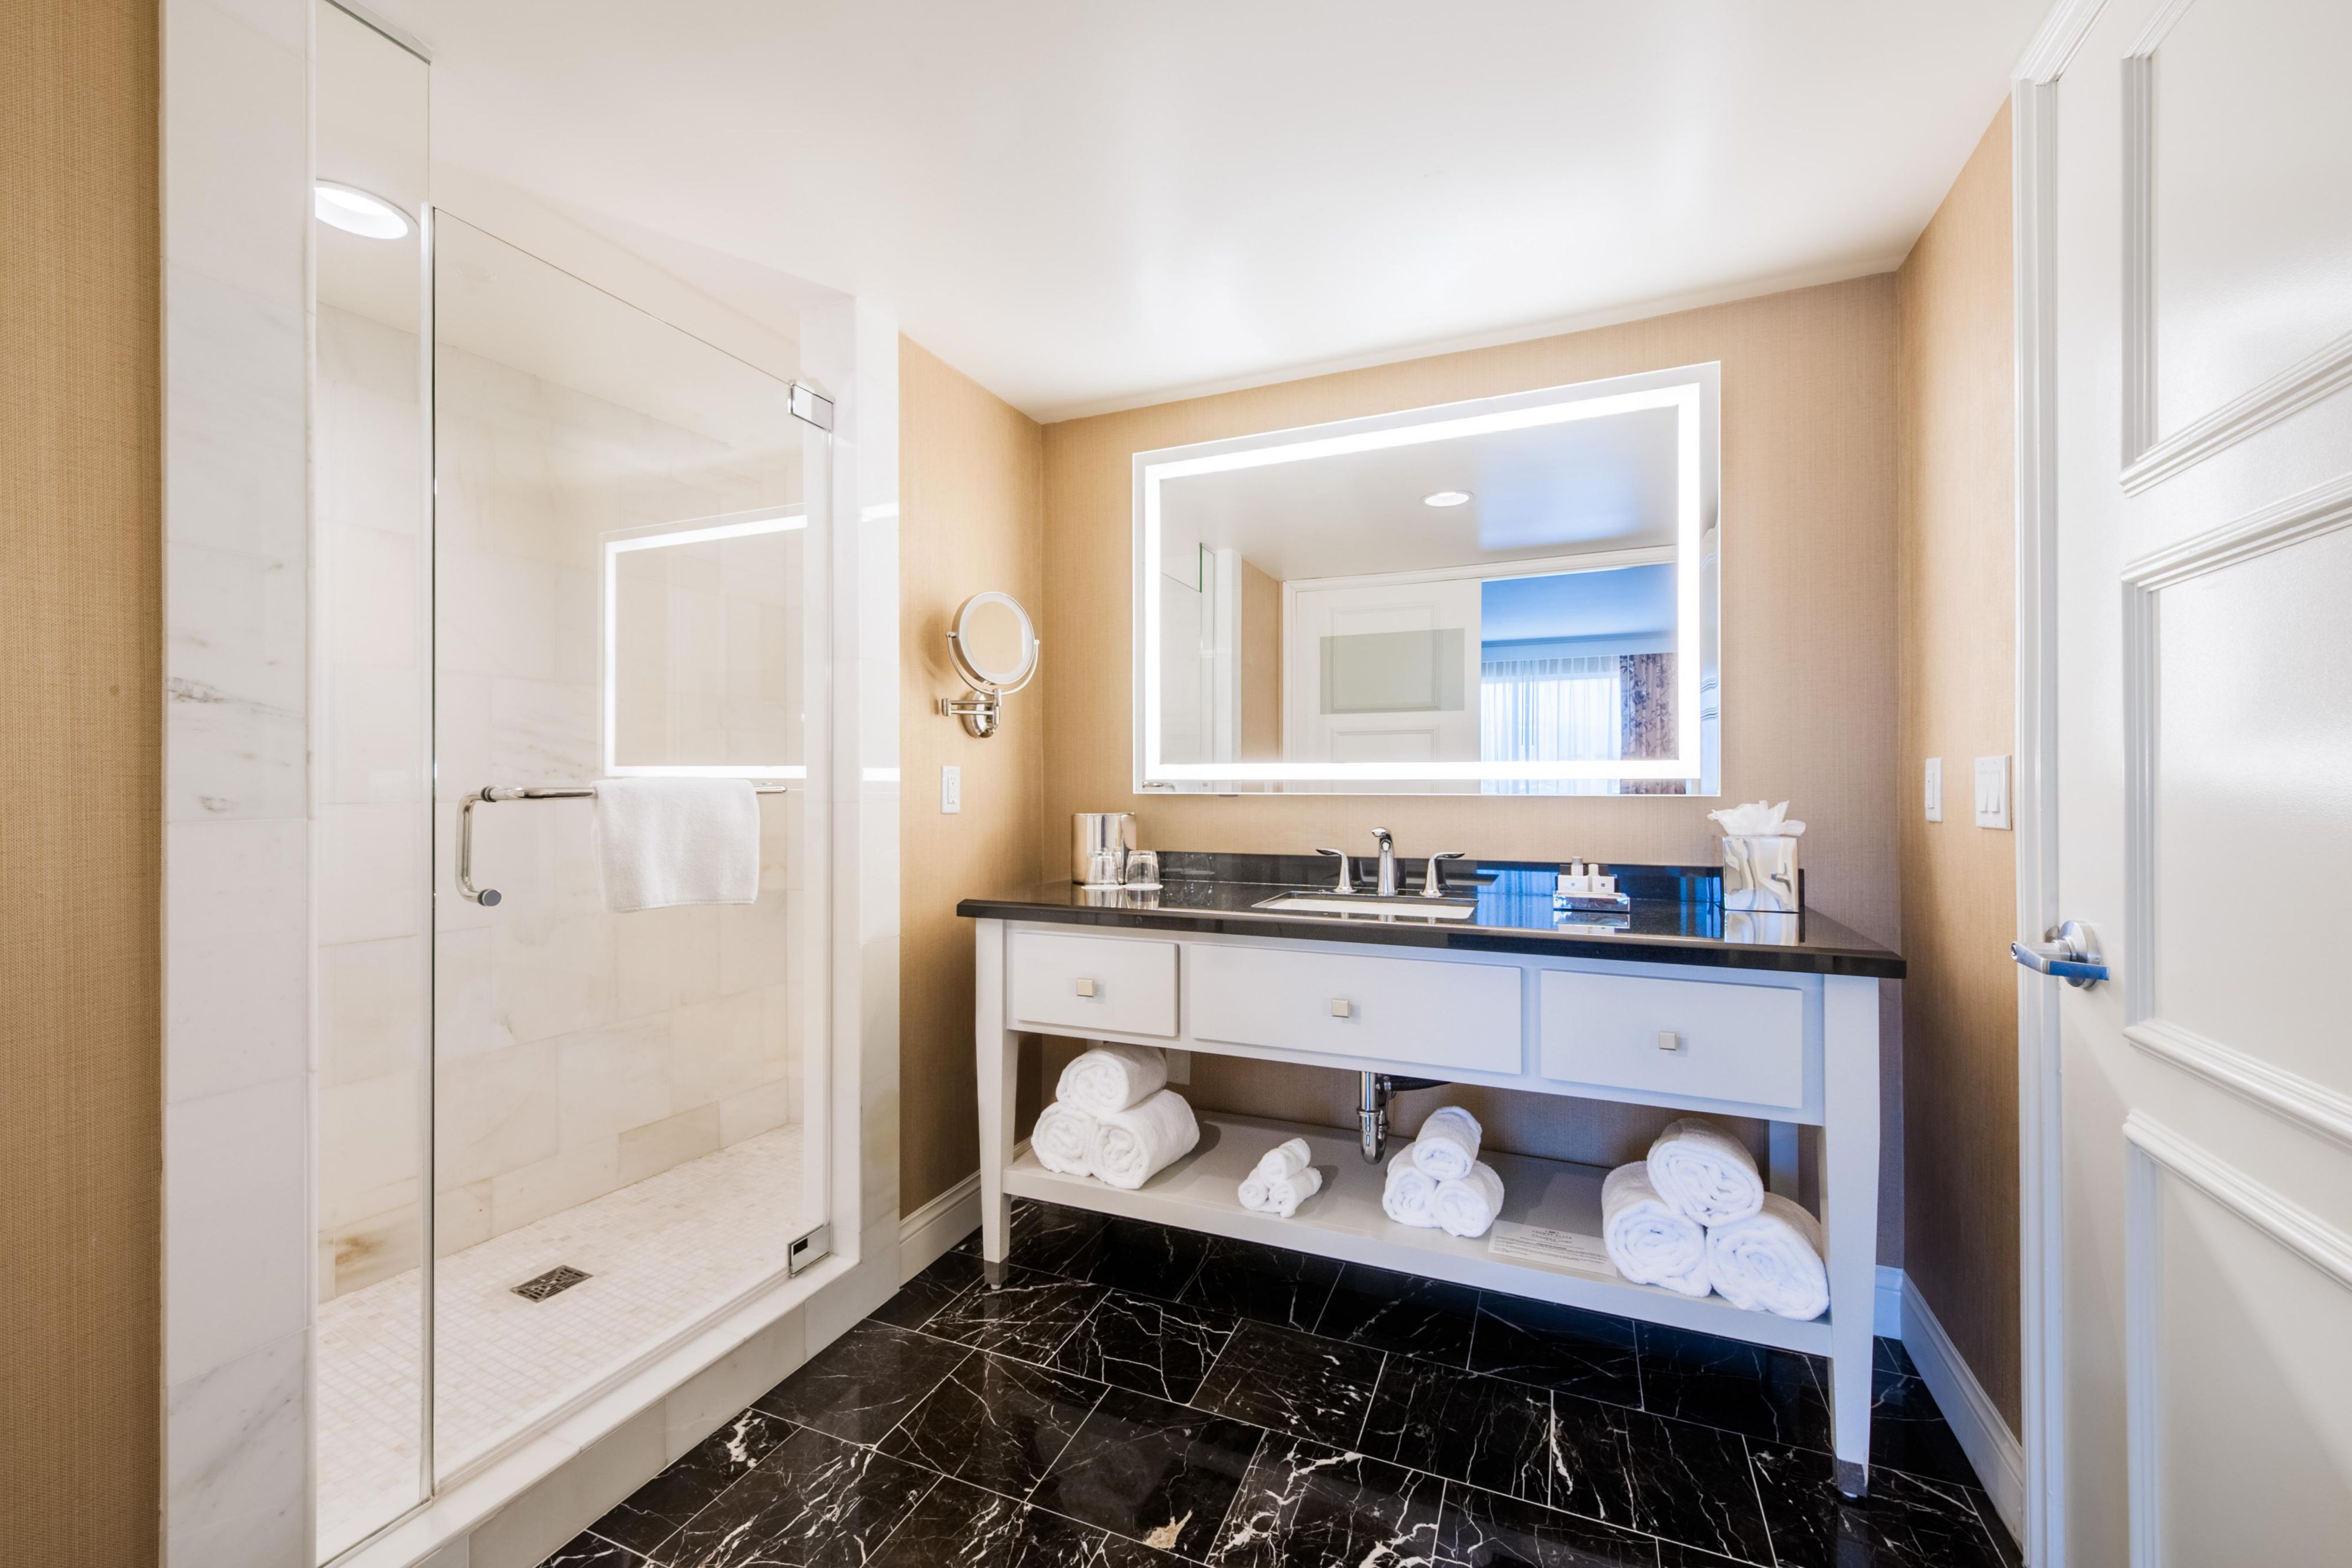 Get ready in style in the 2 room king suite bathroom